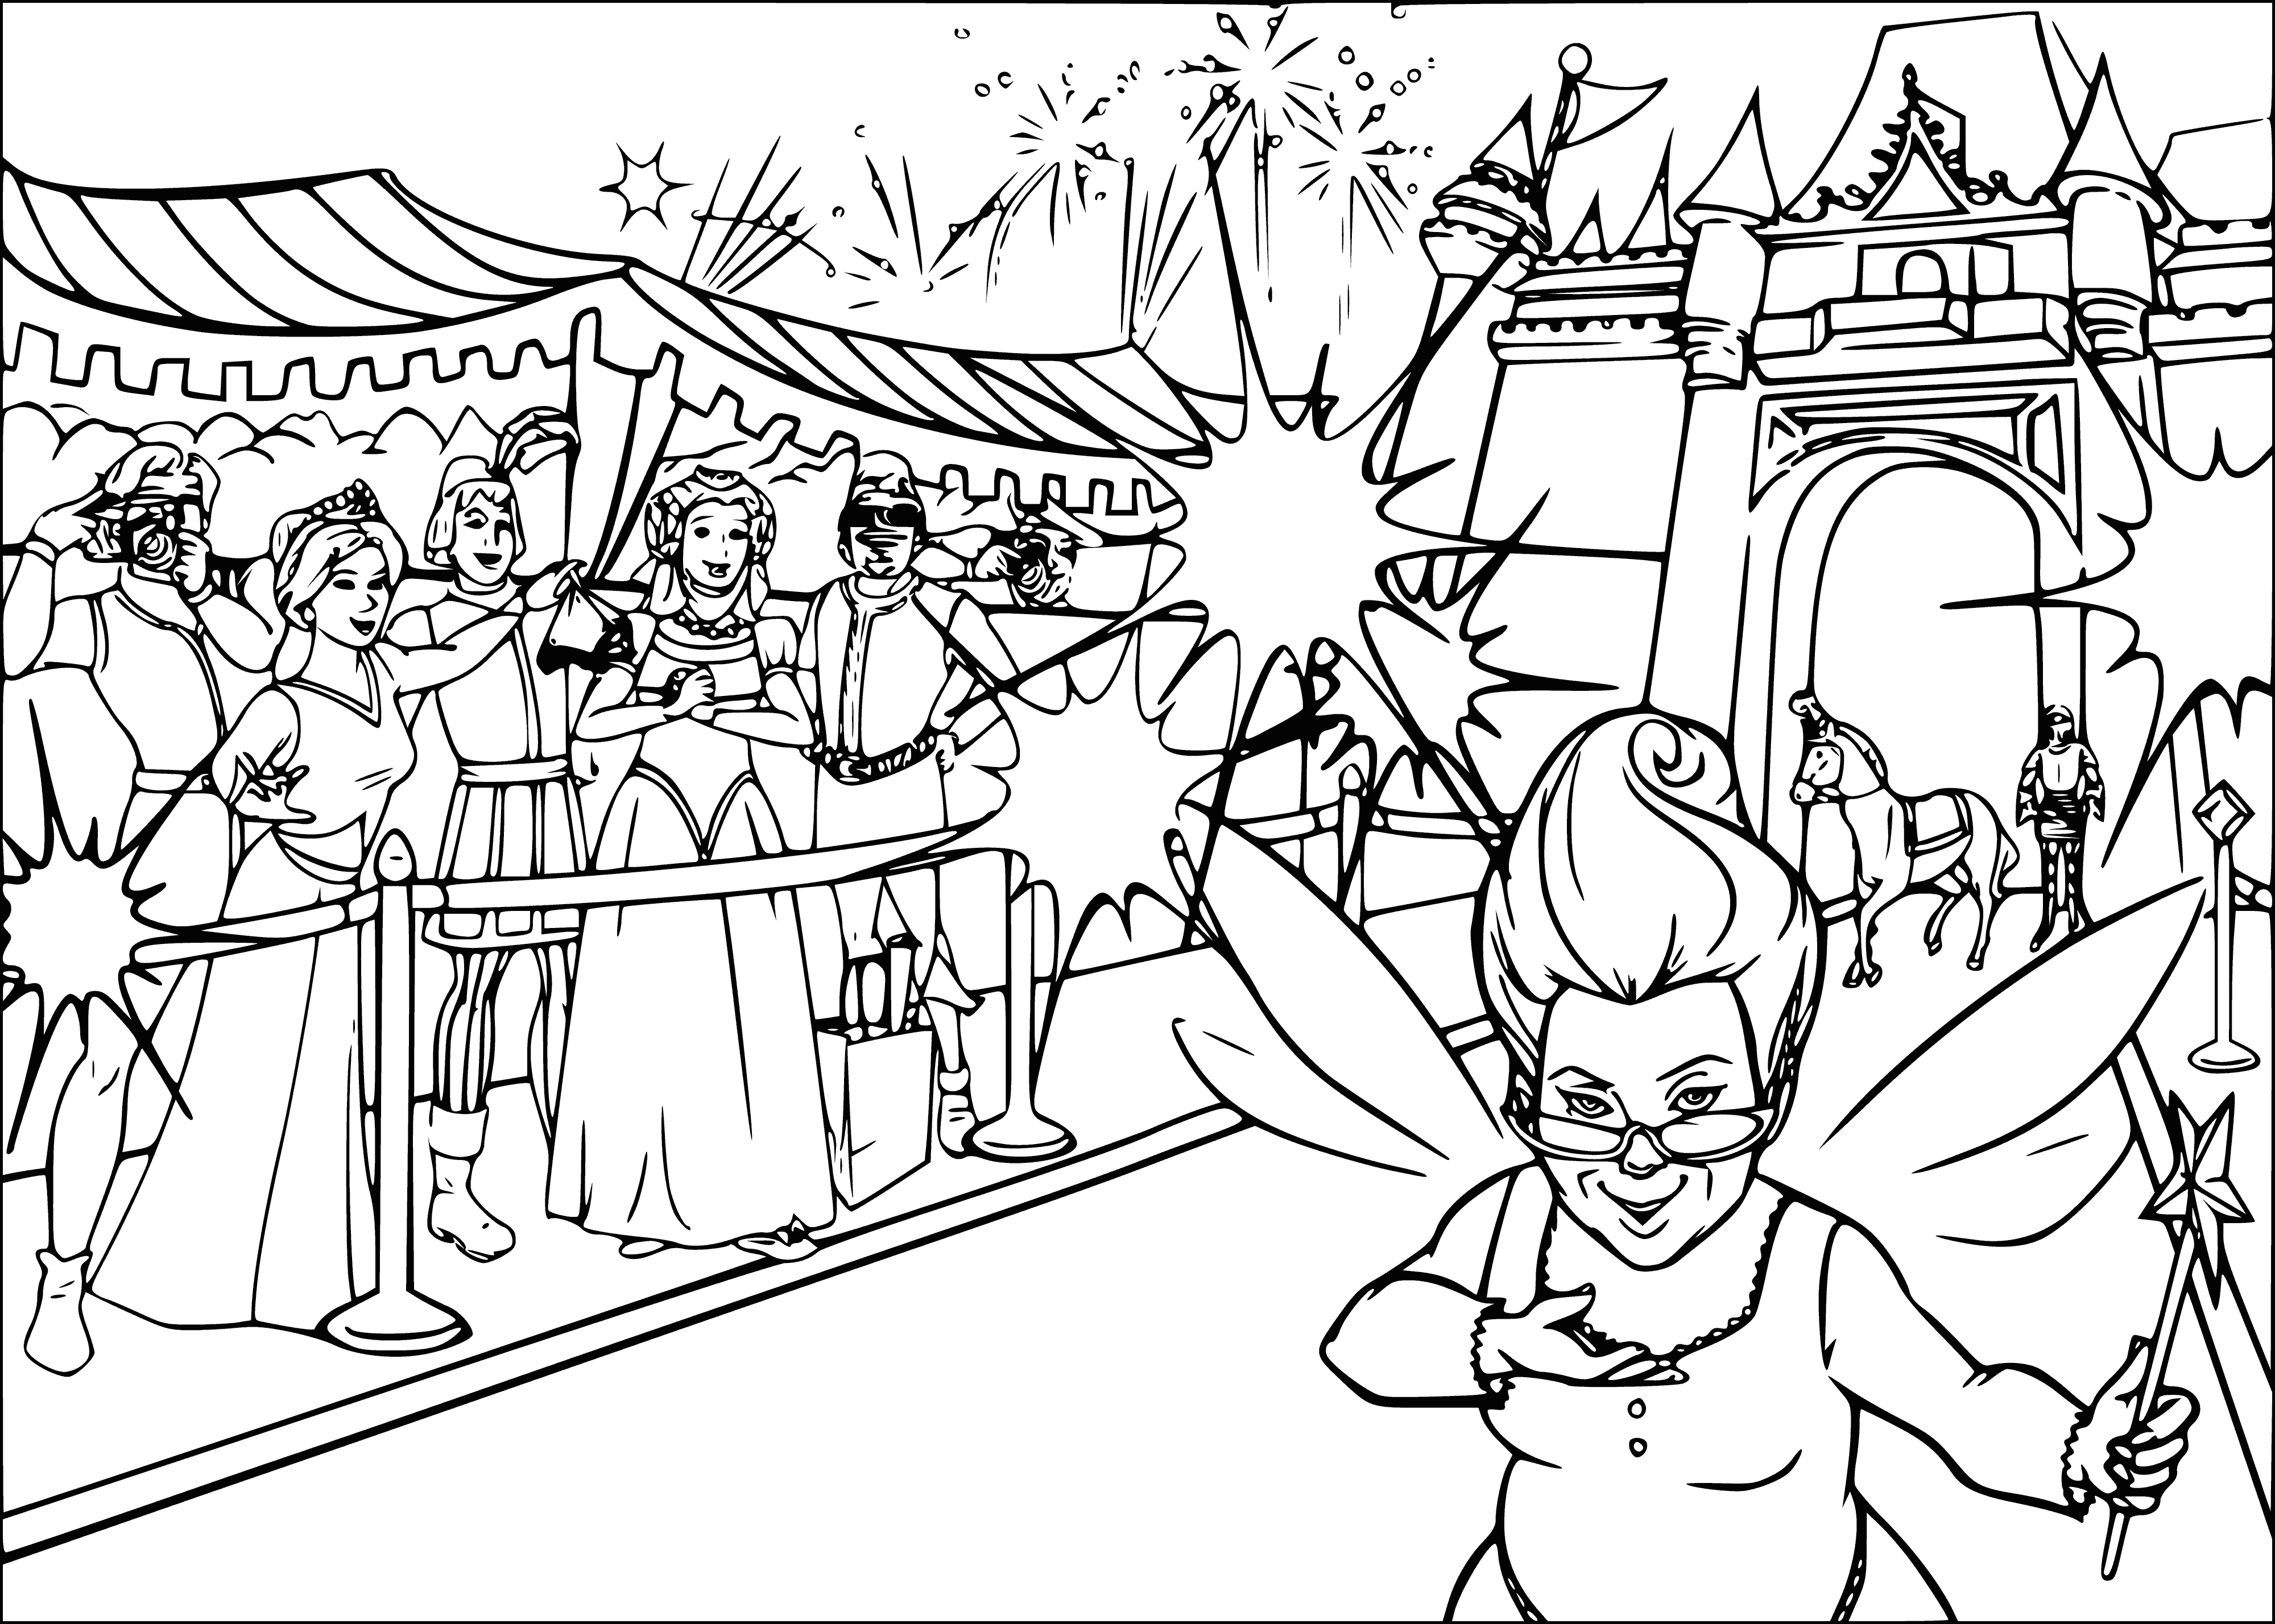 coloring page: Coloring page of the red carpet for movie "Shrek", featuring "Shrek" in green letters, two green trees, & people in different clothes holding cameras. #Shrek